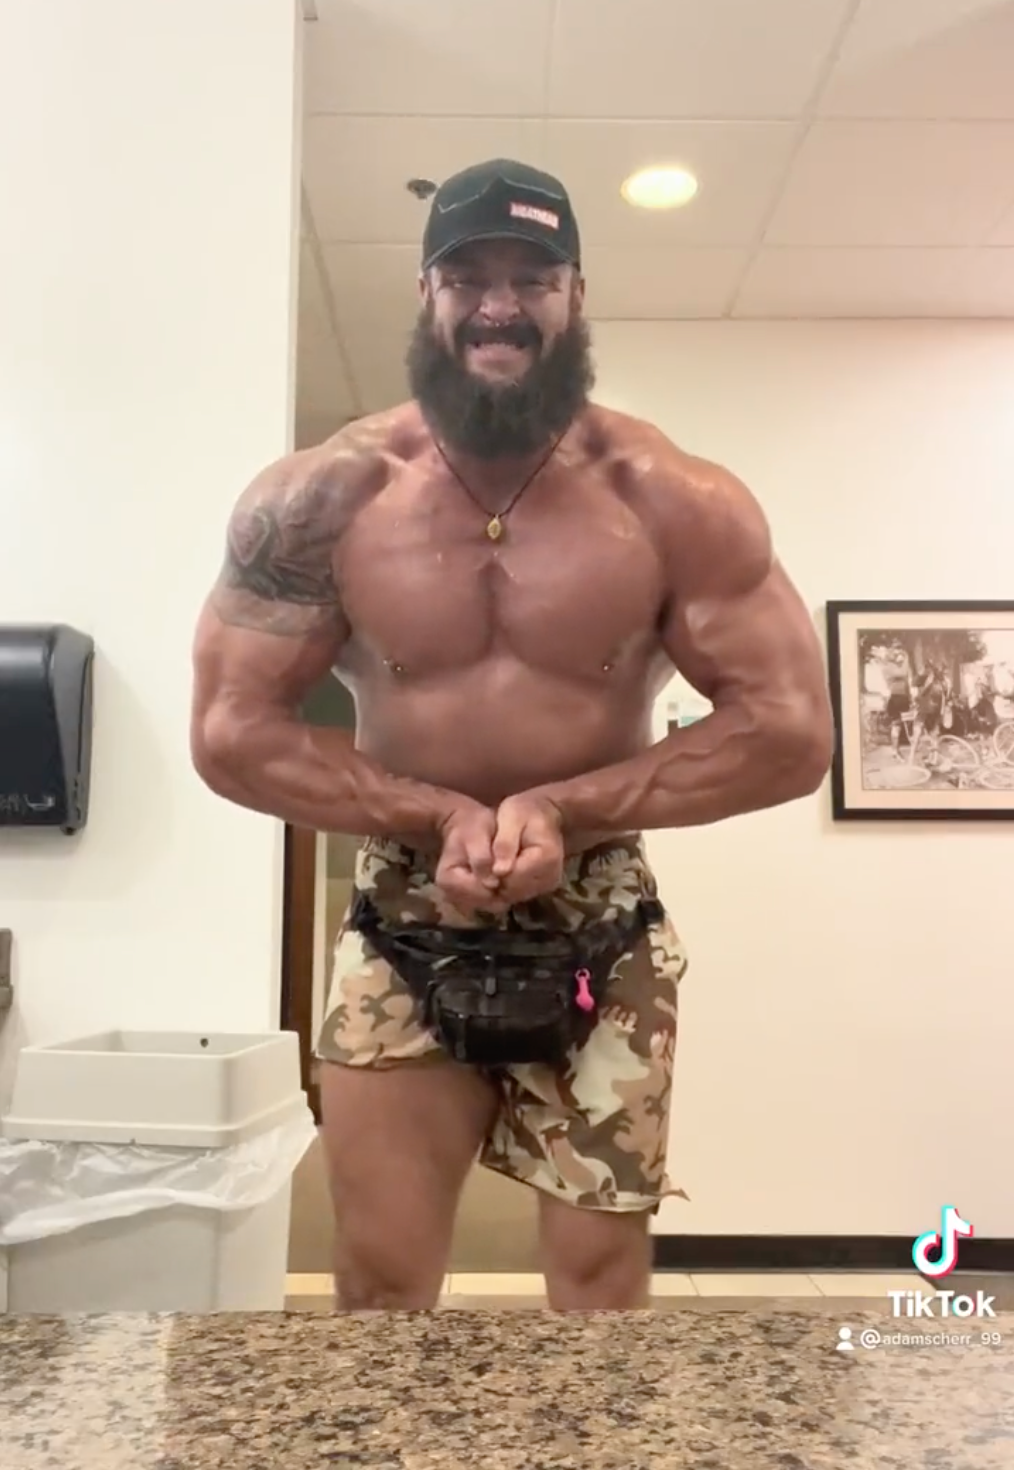 Braun Strowman: Ex-WWE star's monstrous physique as he eyes bodybuilding future